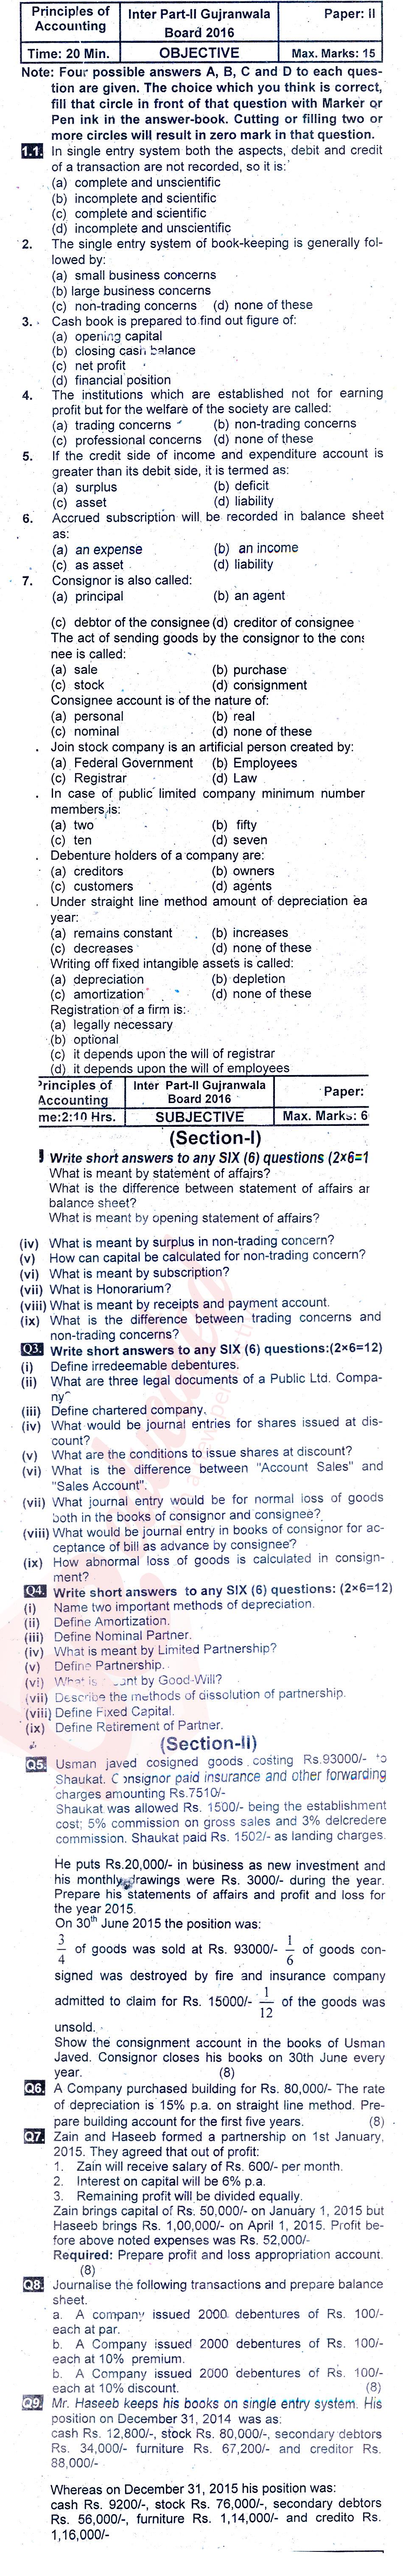 Principles of Accounting ICOM Part 2 Past Paper Group 1 BISE Gujranwala 2016